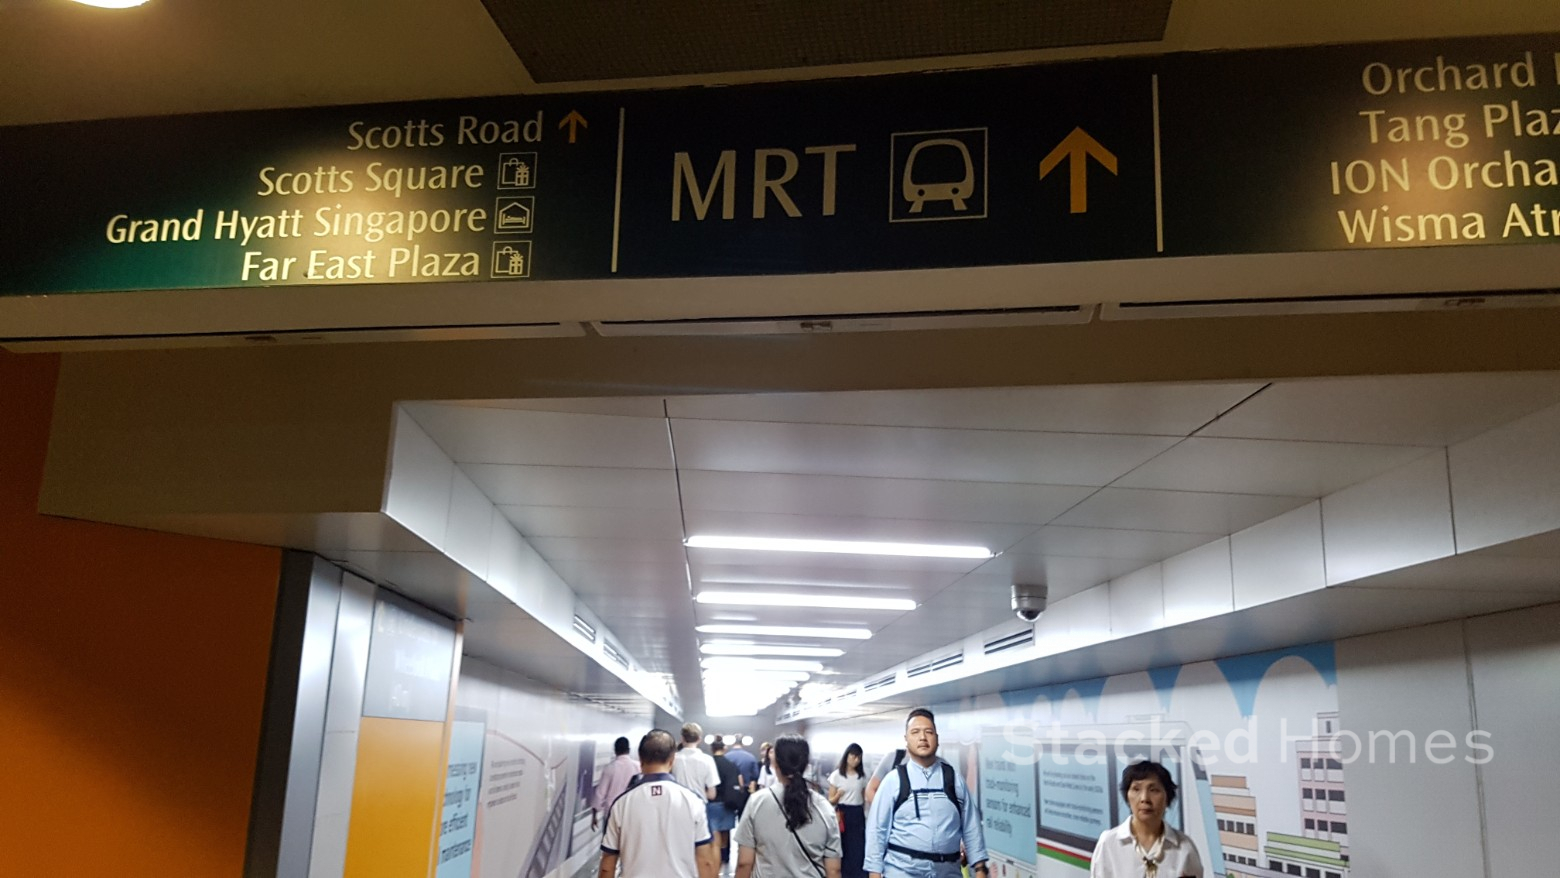 orchard towers mrt